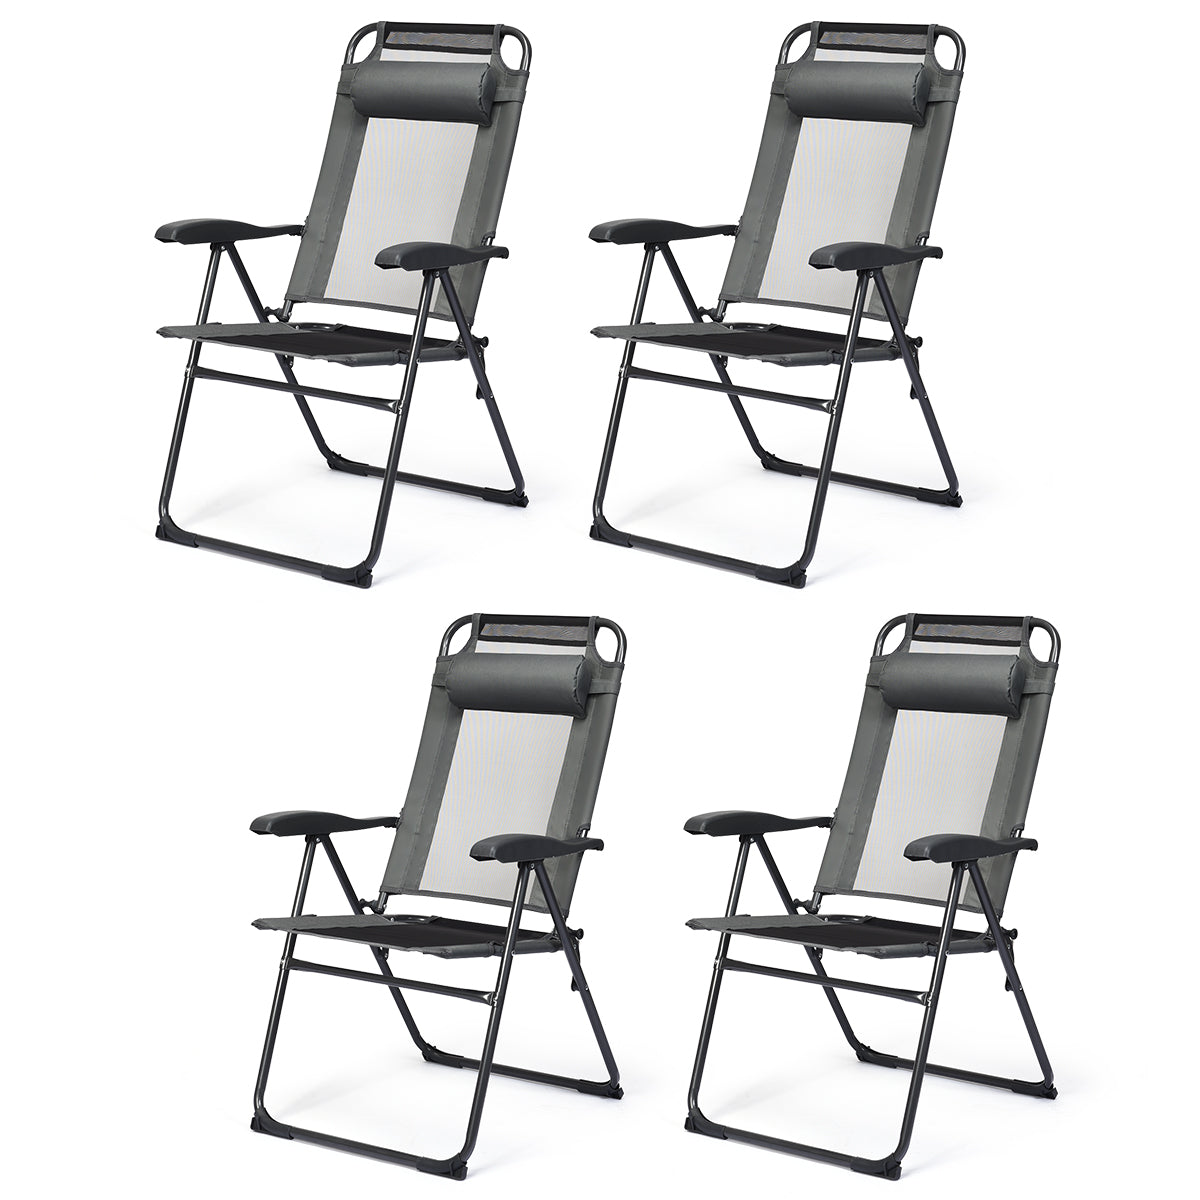 Giantex Set of 2 Patio Dining Chairs, Folding Lounge Chairs with 7 Level Adjustable Backrest